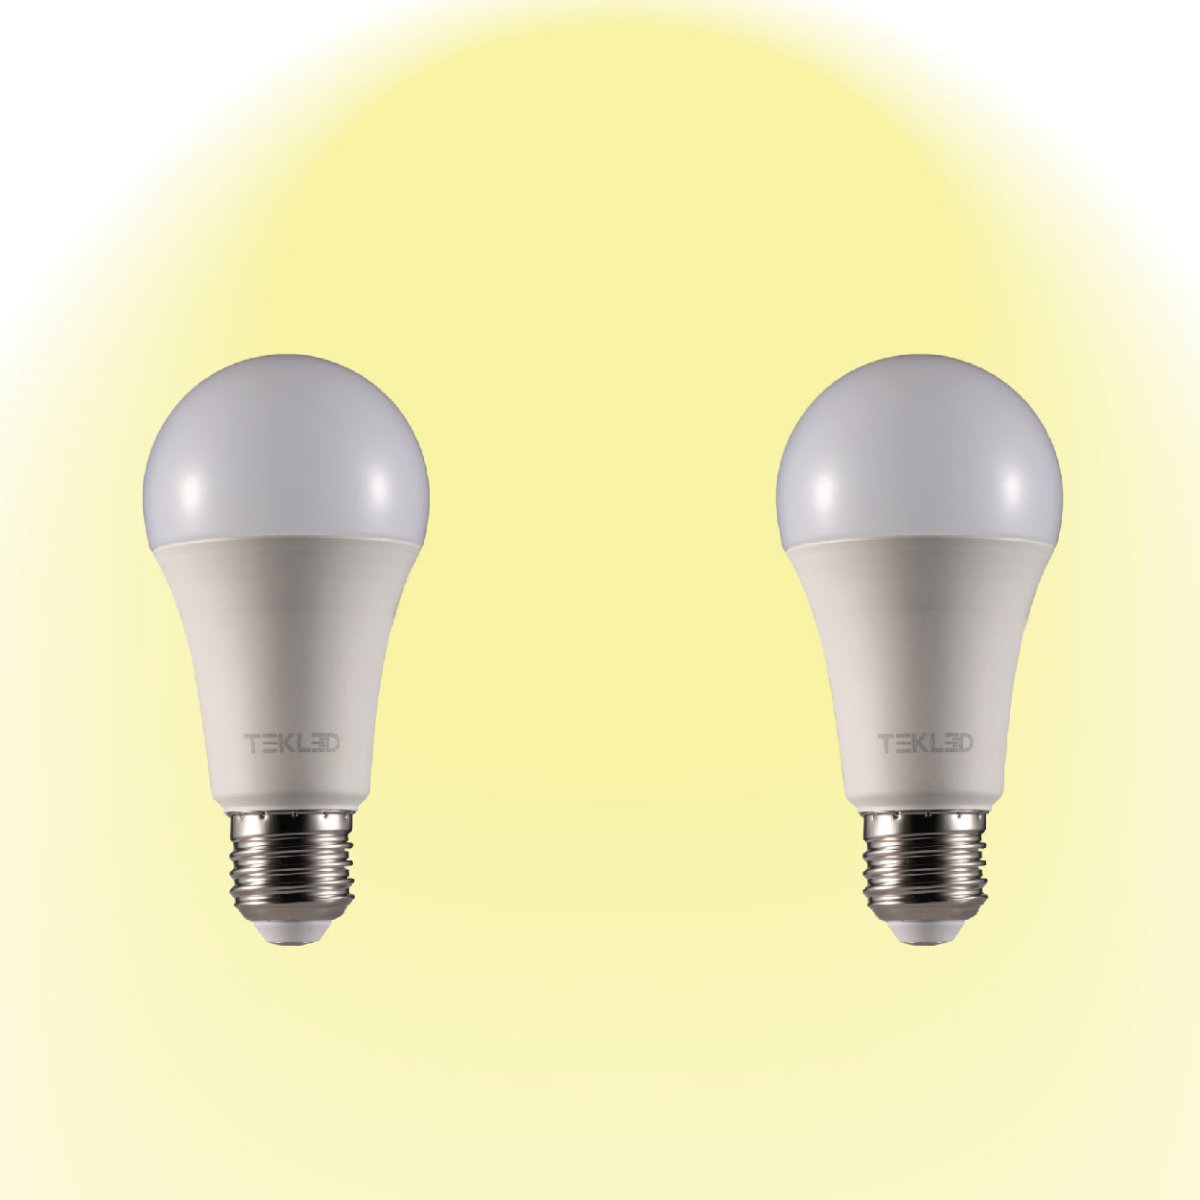 Virgo LED GLS Bulb A60 Dimmable E27 Edison Screw 2700K Warm White 12 W Pack of 2 527-15632